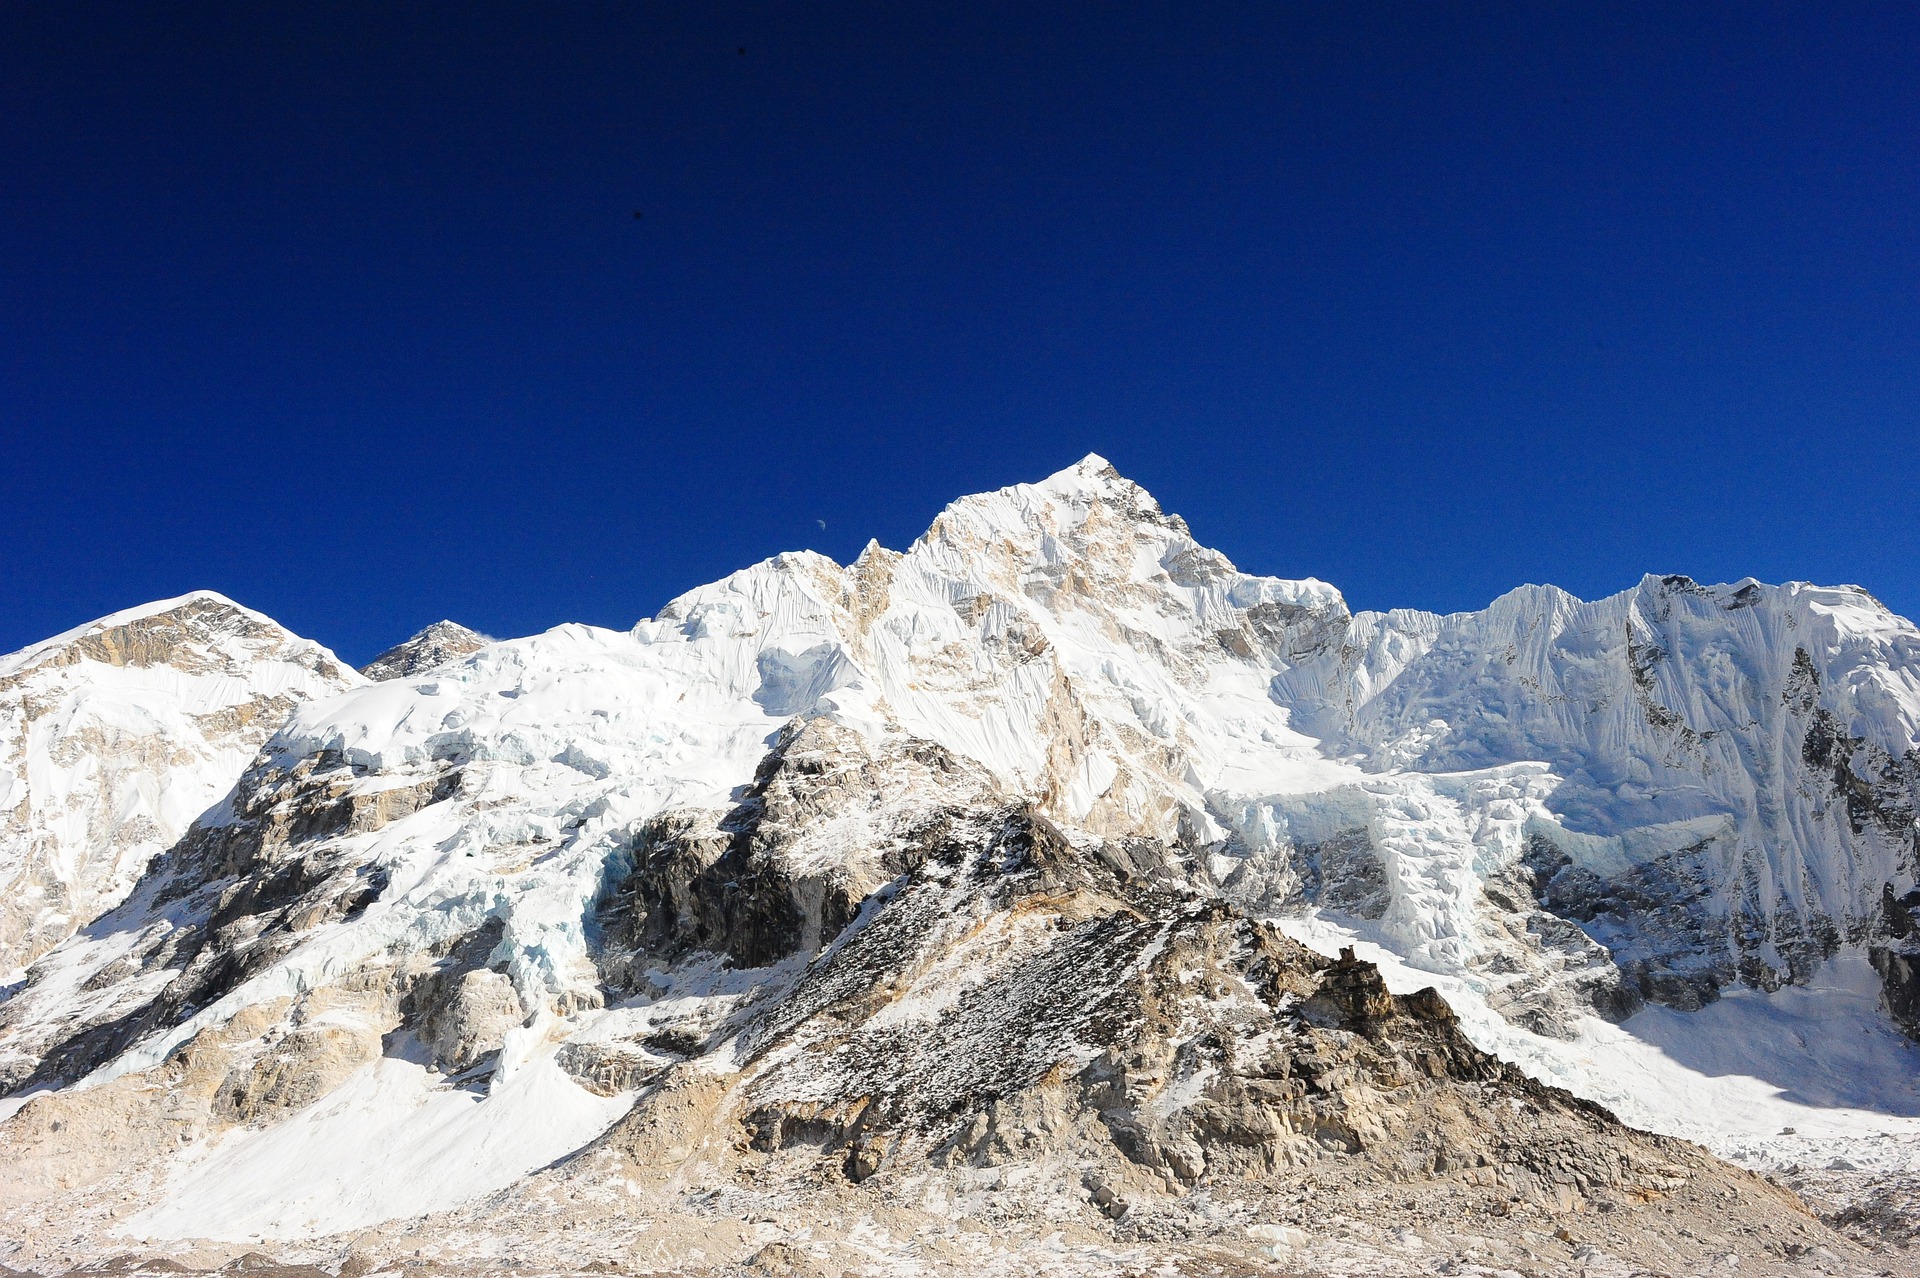  View of Mount Everest